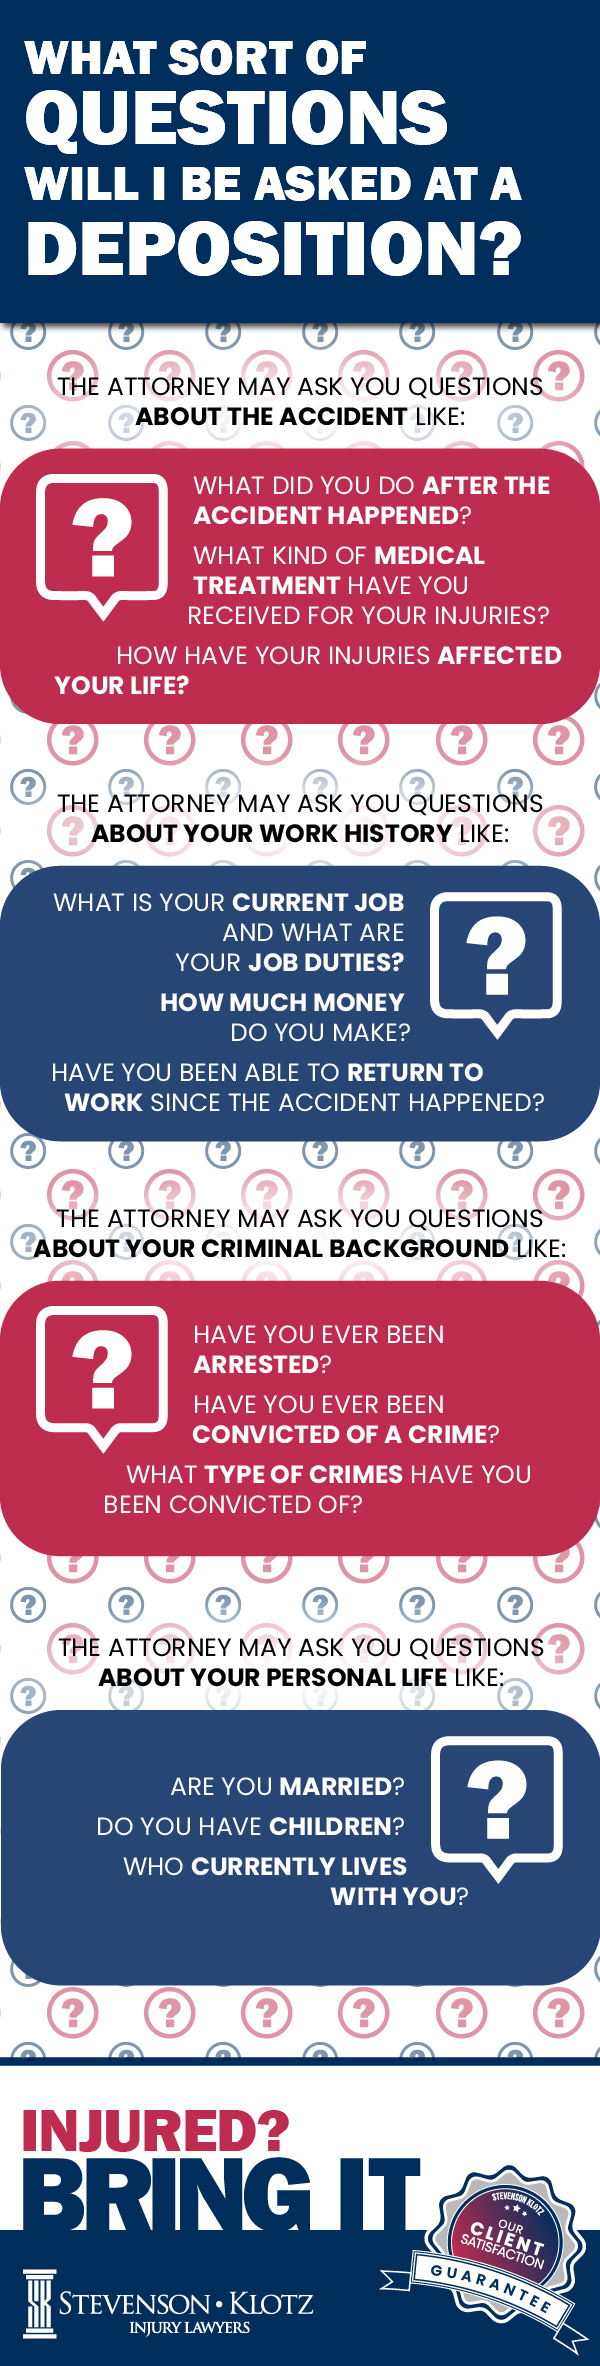 Deposition Questions Infographic